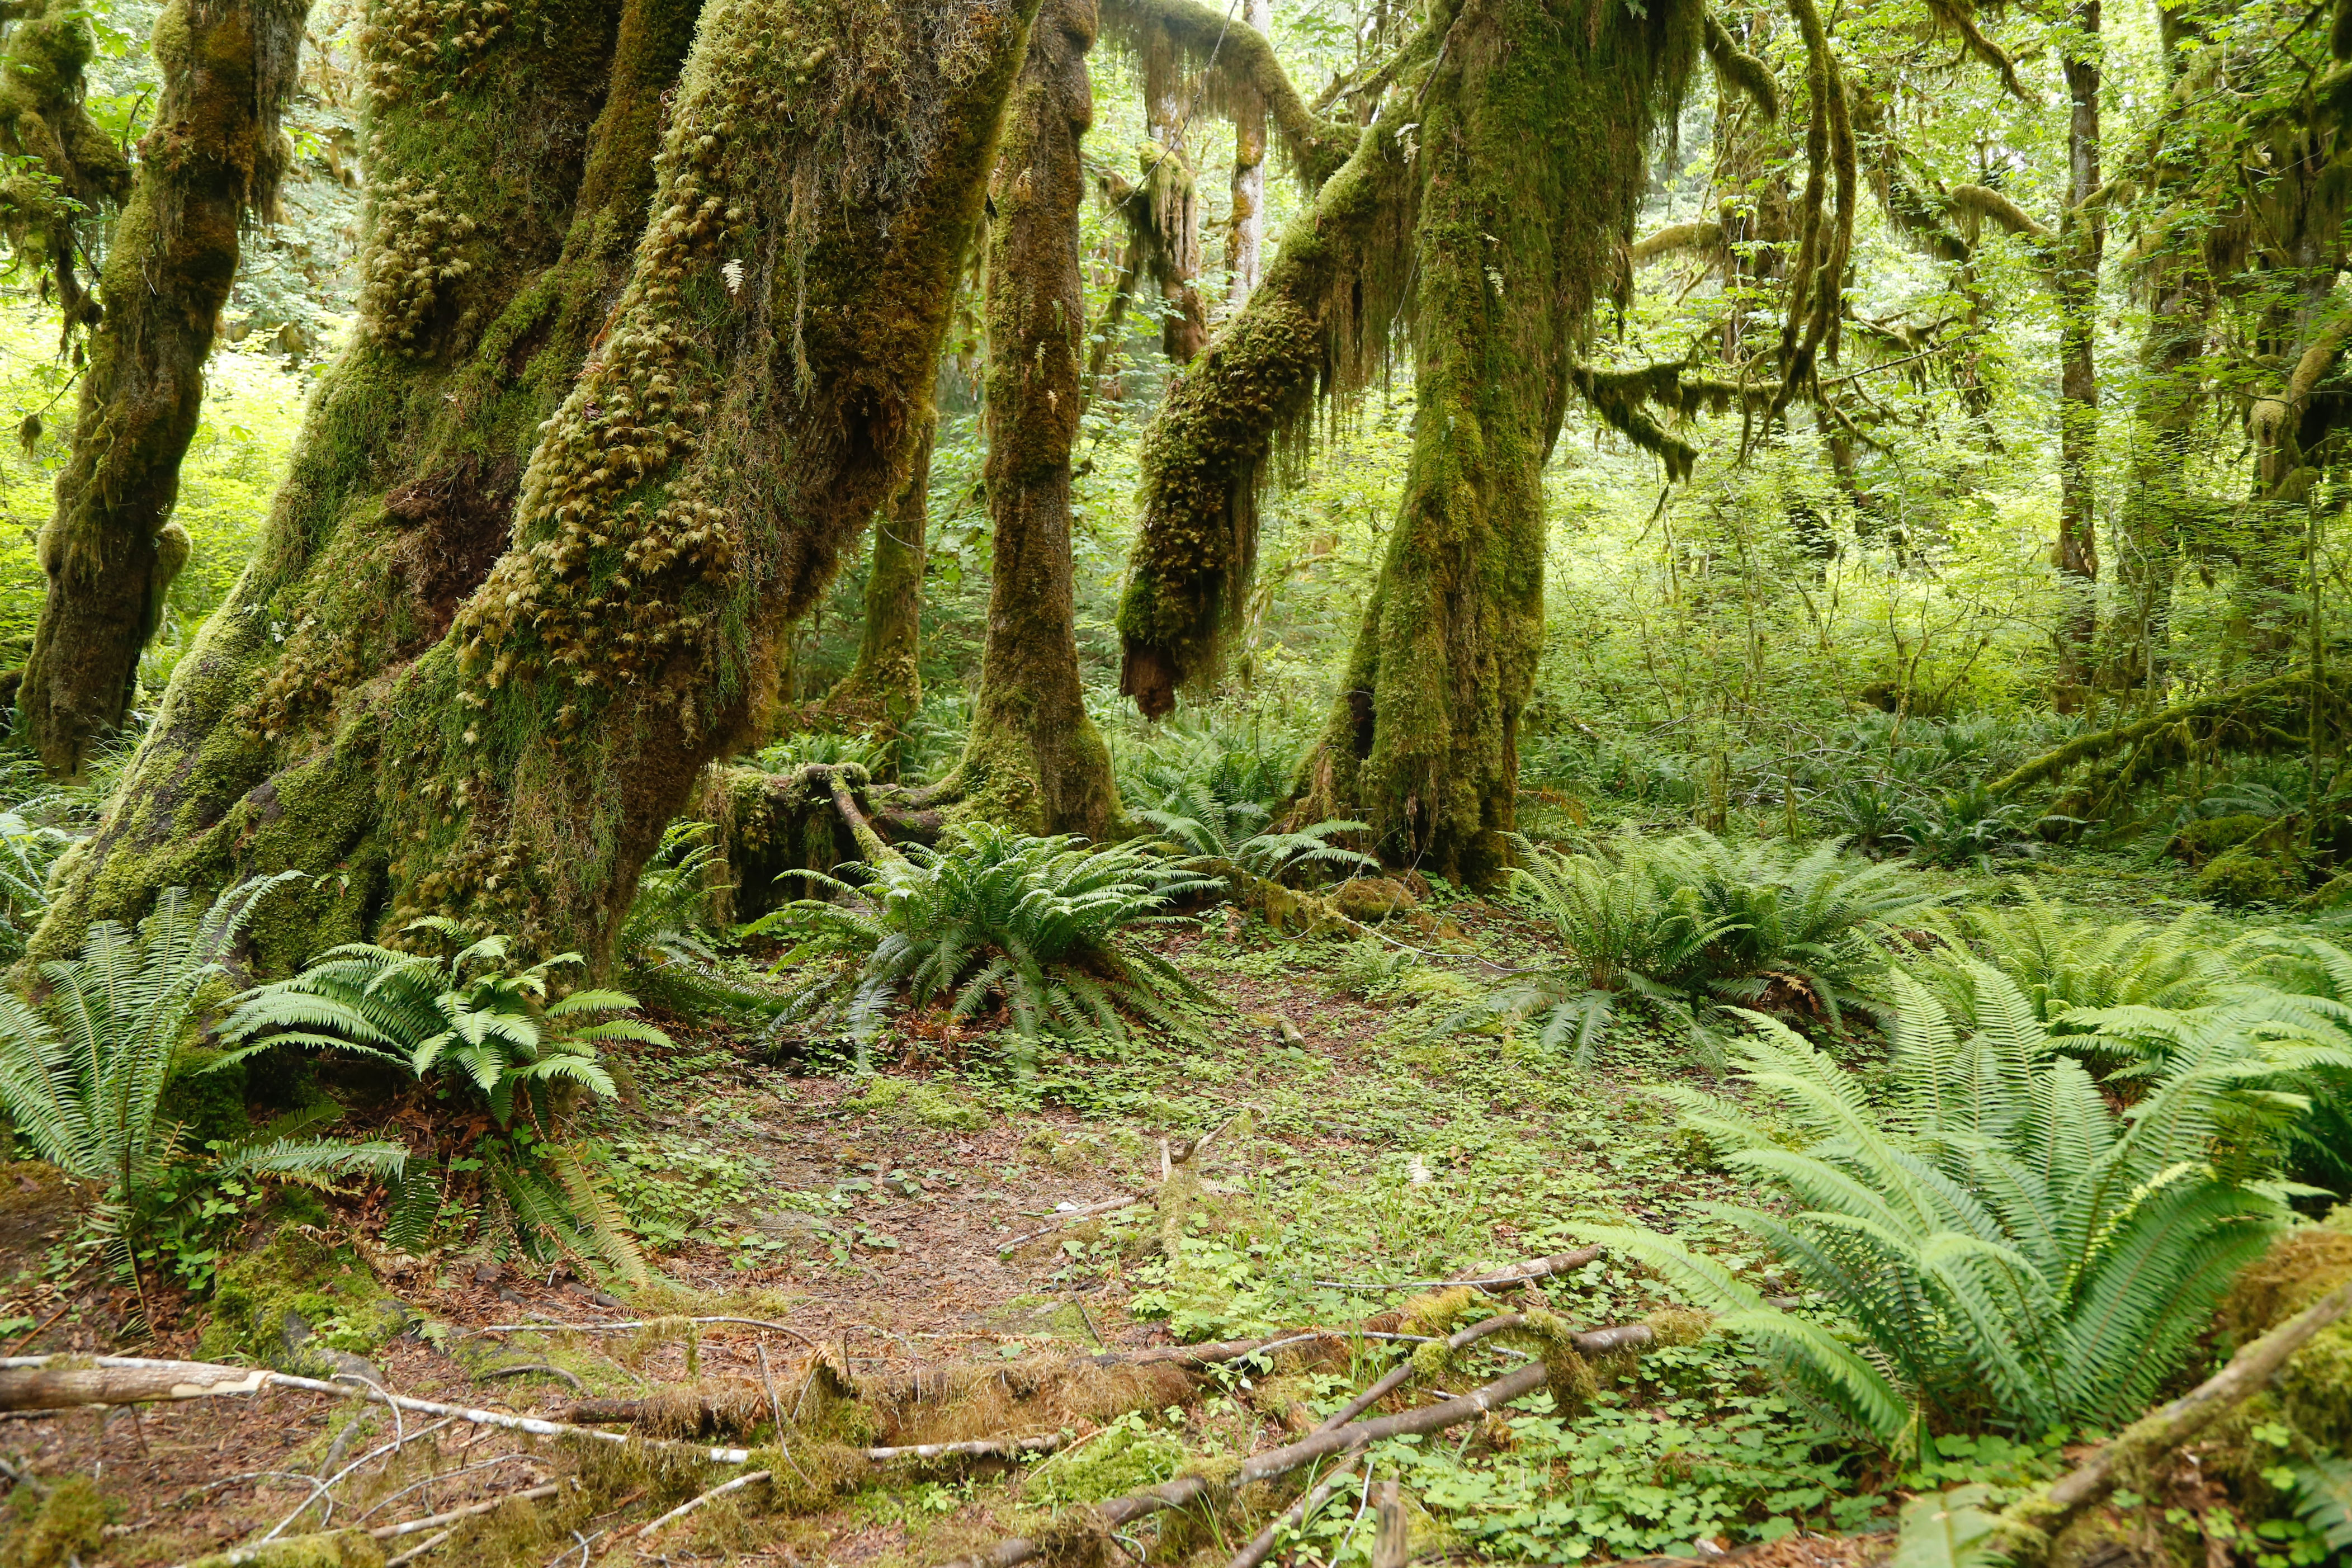 <p>Calling all nature lovers—the Olympic Peninsula is a natural paradise. Lush rainforests, rugged coastlines, and snow-capped peaks make it a truly unique ecosystem in a relatively small area.</p><p><strong>Highlights:</strong> Hoh Rainforest, Rialto Beach, Olympic Mountains</p><p><strong>Activities to Enjoy:</strong> Hiking, wildlife encounters, photography</p>